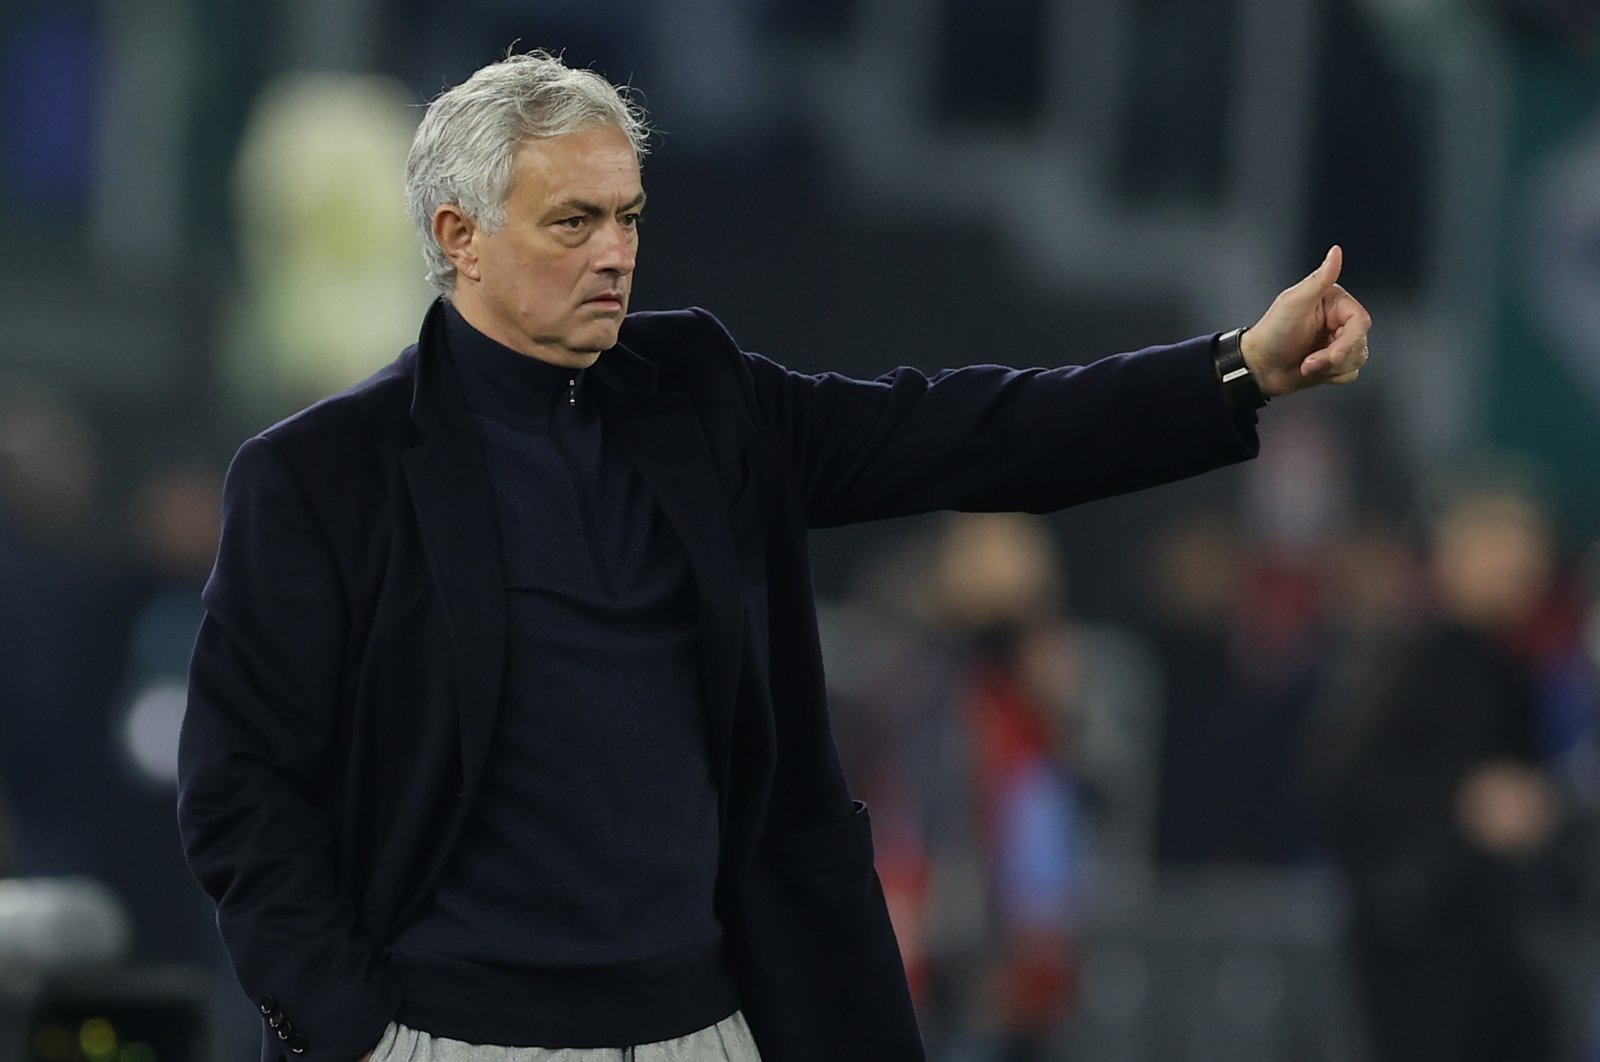 Jose Mourinho gestures during the Italy Cup quarterfinals football match between Lazio and Roma at the Olimpico Stadium, Rome, Italy, Jan. 10, 2024. (Getty Images Photo)